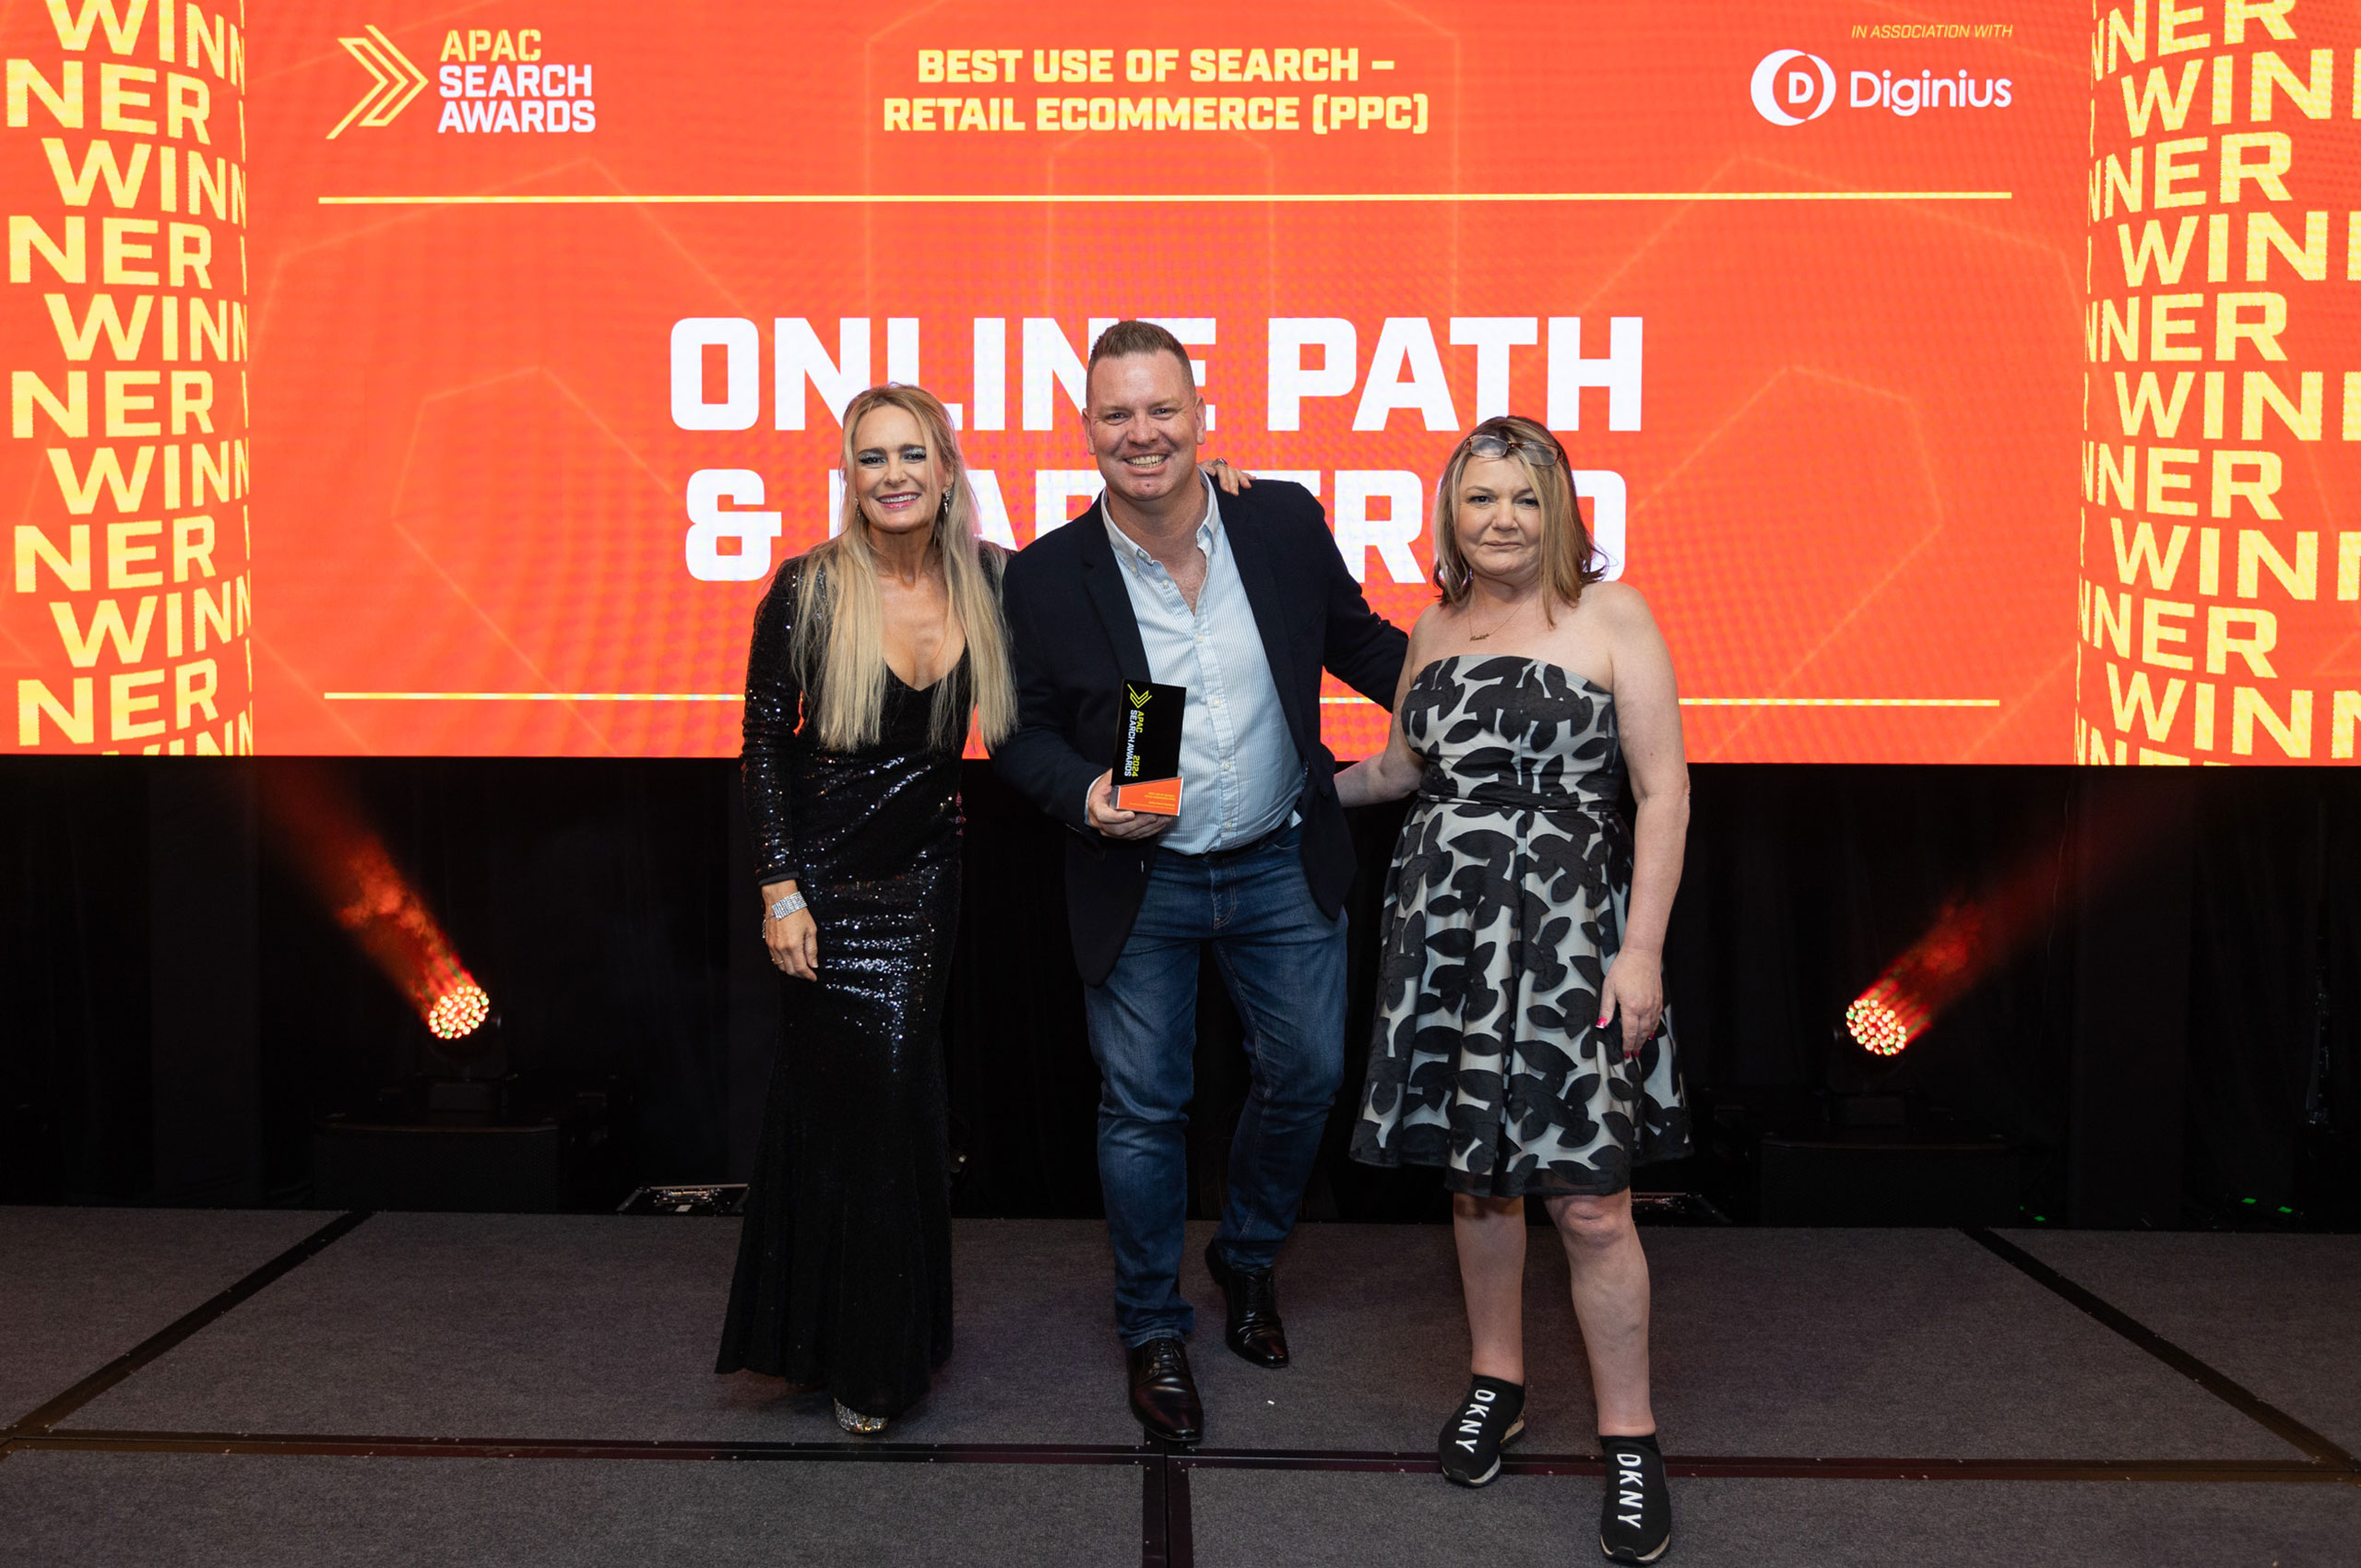 Image: Online Path: Paving the Path to Success with Prestigious APAC Search Award